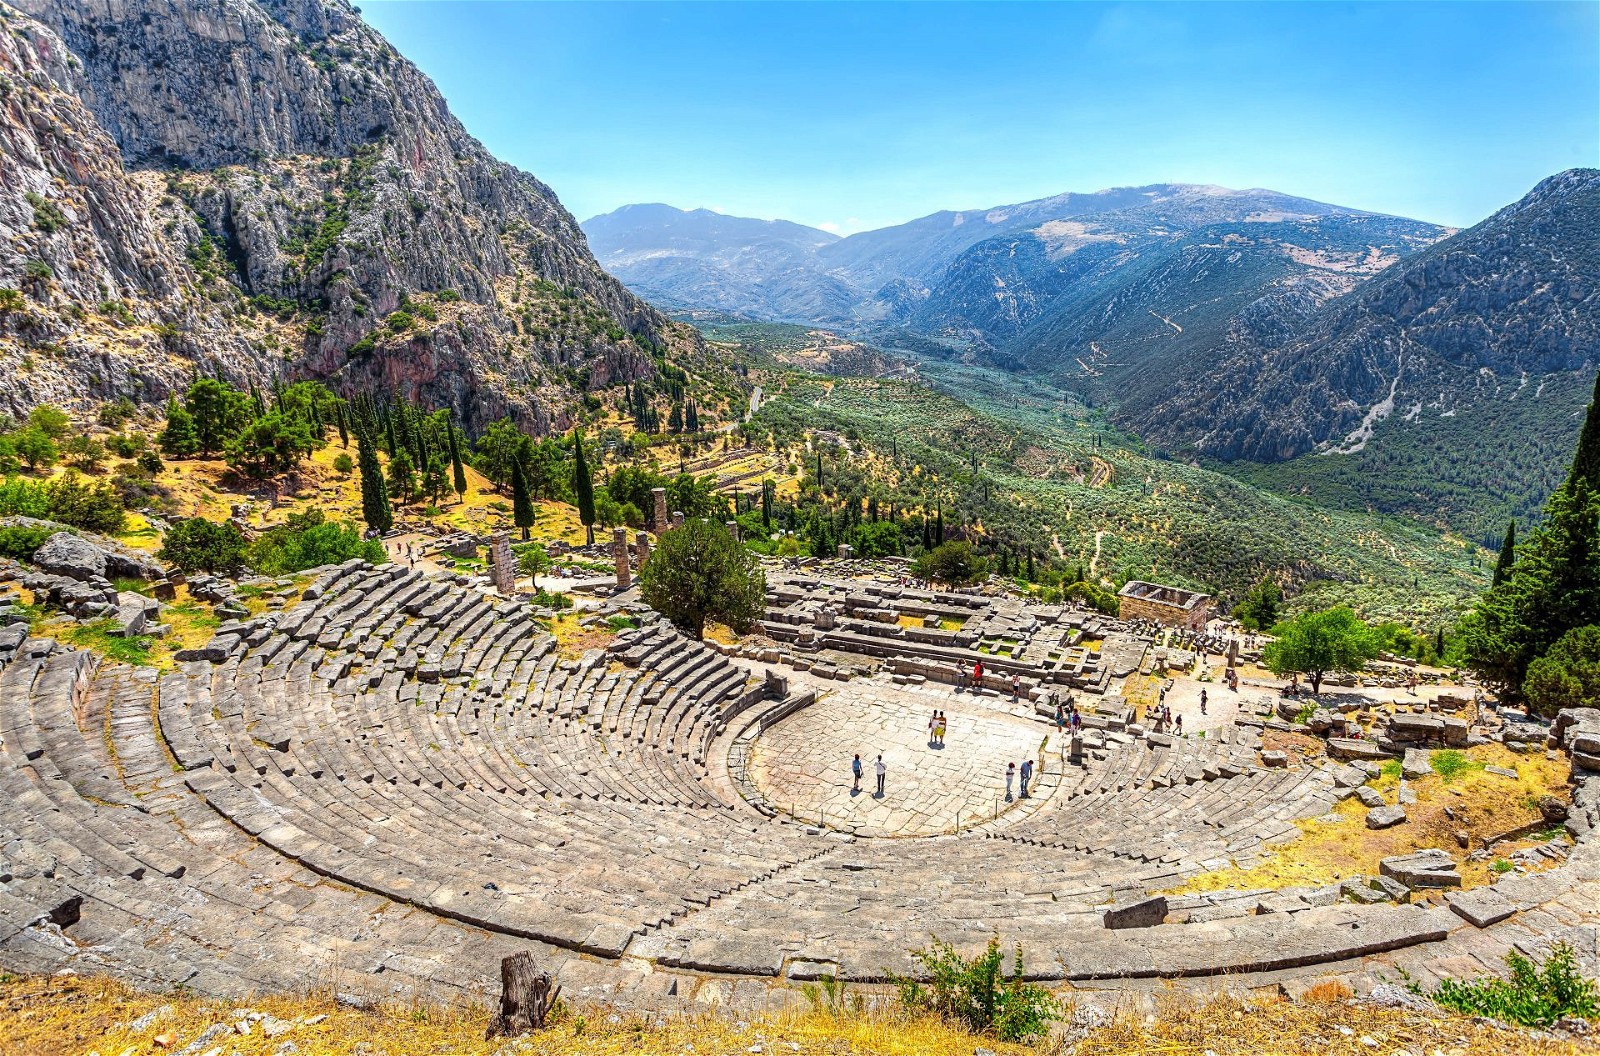 Delphi Ancient City:  Delphi, located approximately 2.5 hours away from Athens, is one of the most important sacred centers in ancient Greece. In ancient times, Delphi was known as a temple dedicated to Apollo and served as an oracle center.